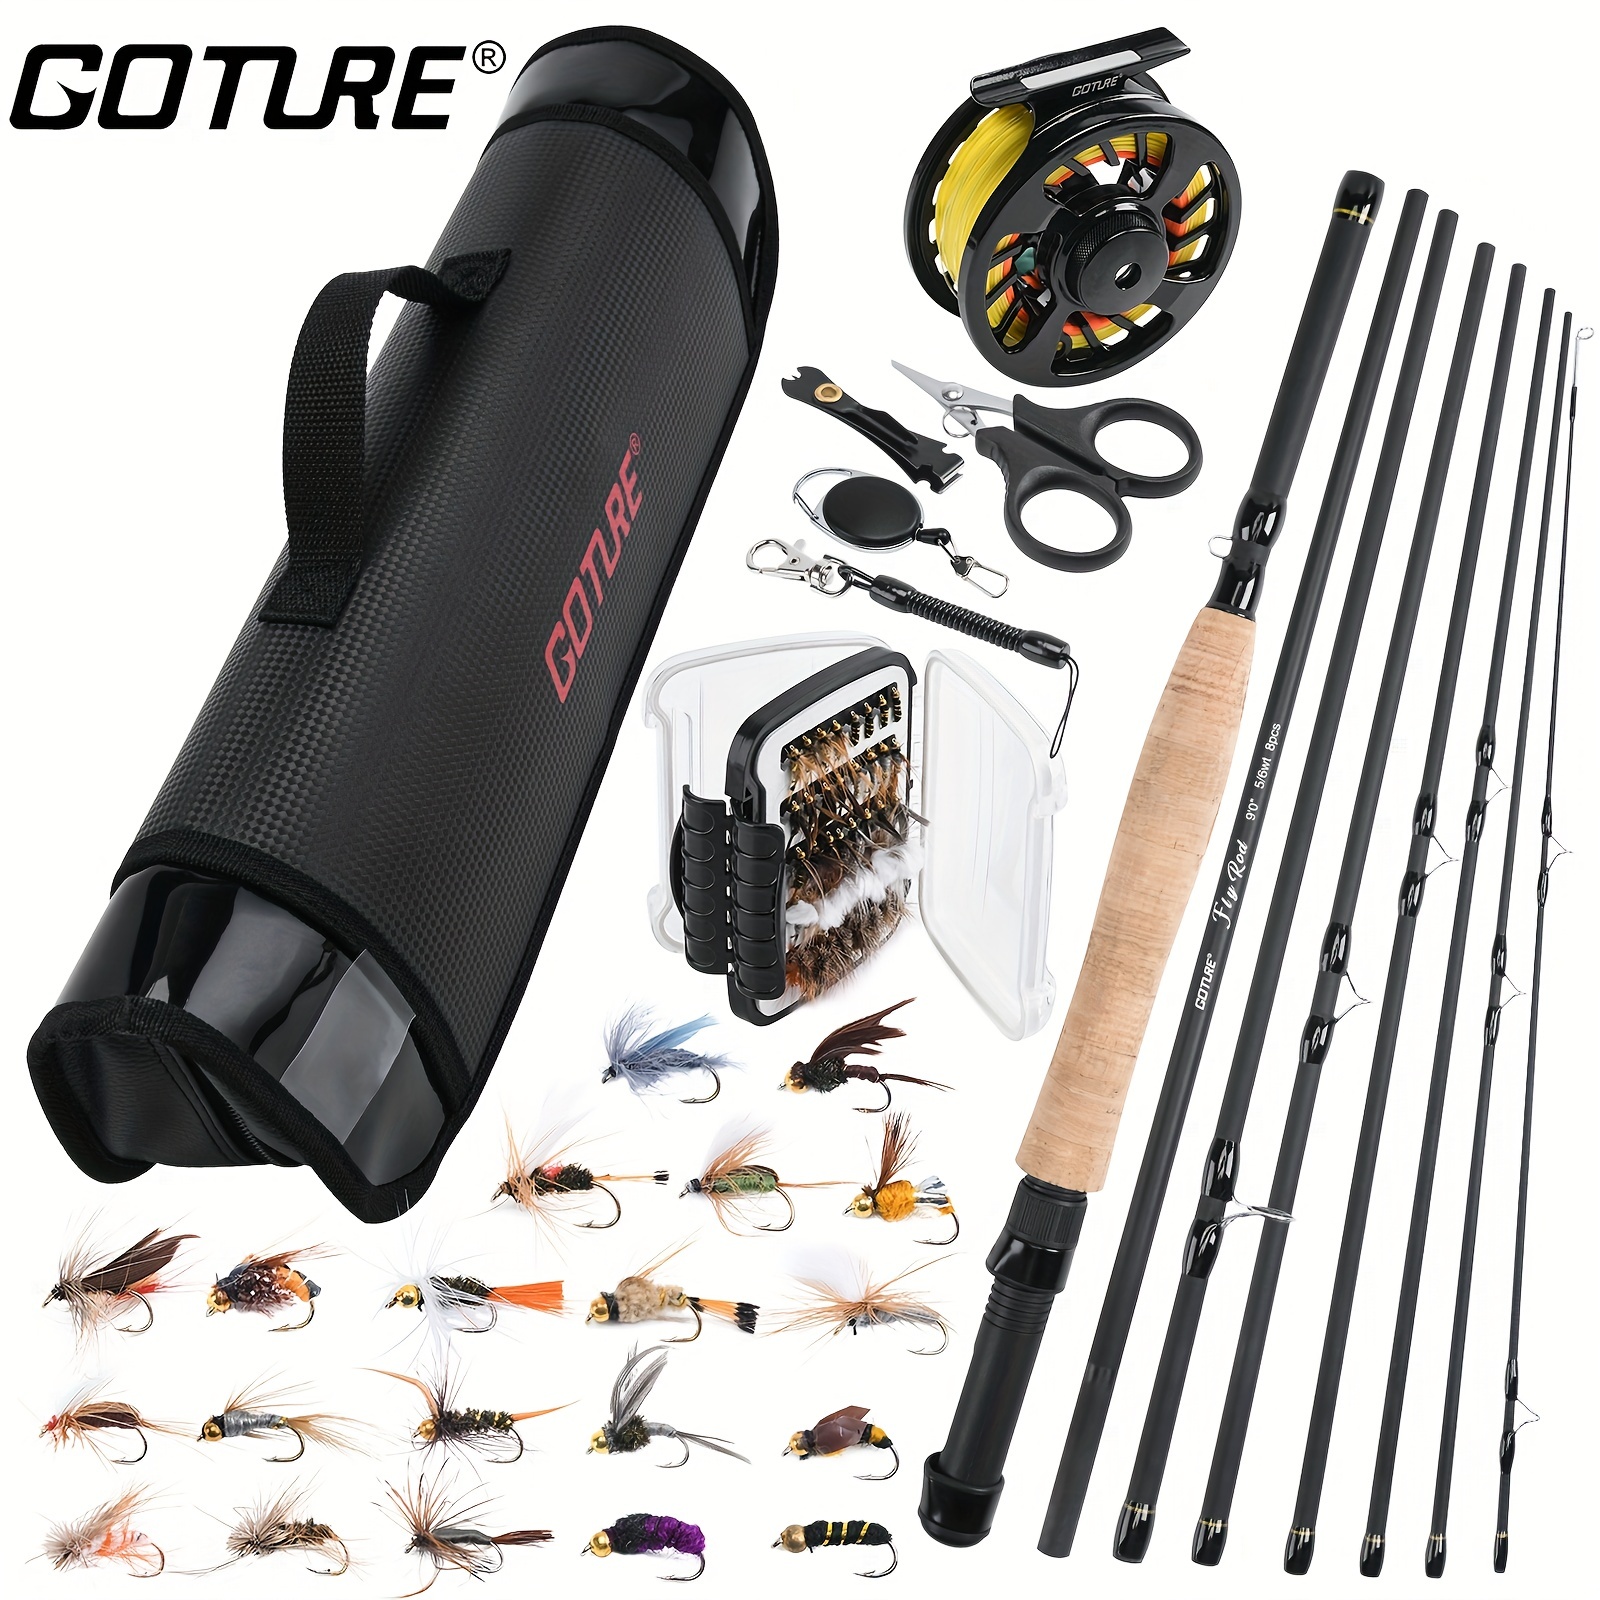 Fly Fishing Combo Rod Reel, Fly Fishing Goture Reel